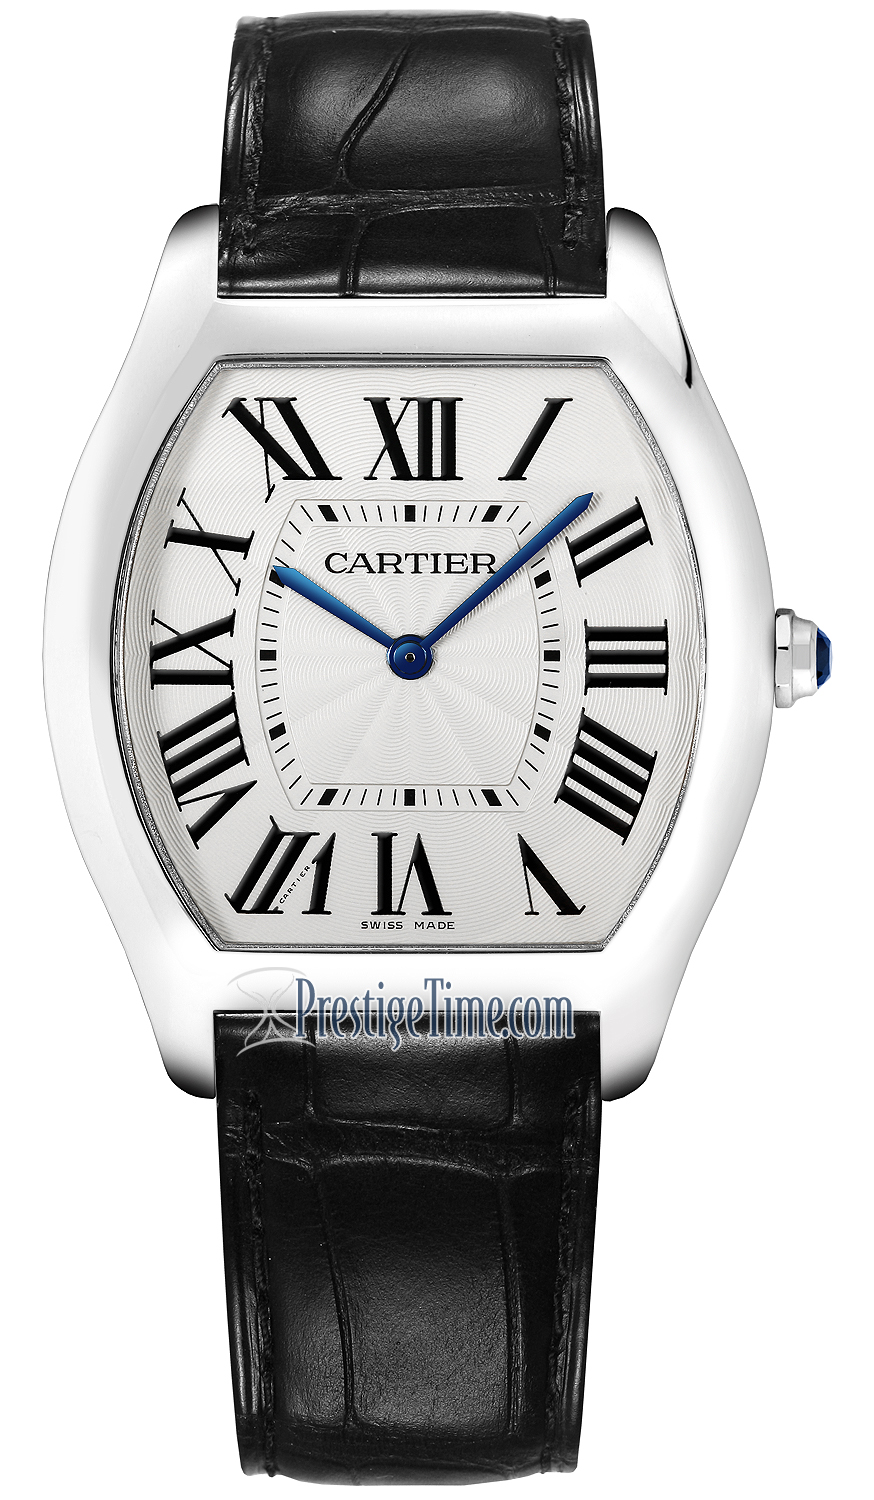 wgto0003 Cartier Tortue Large Midsize Watch